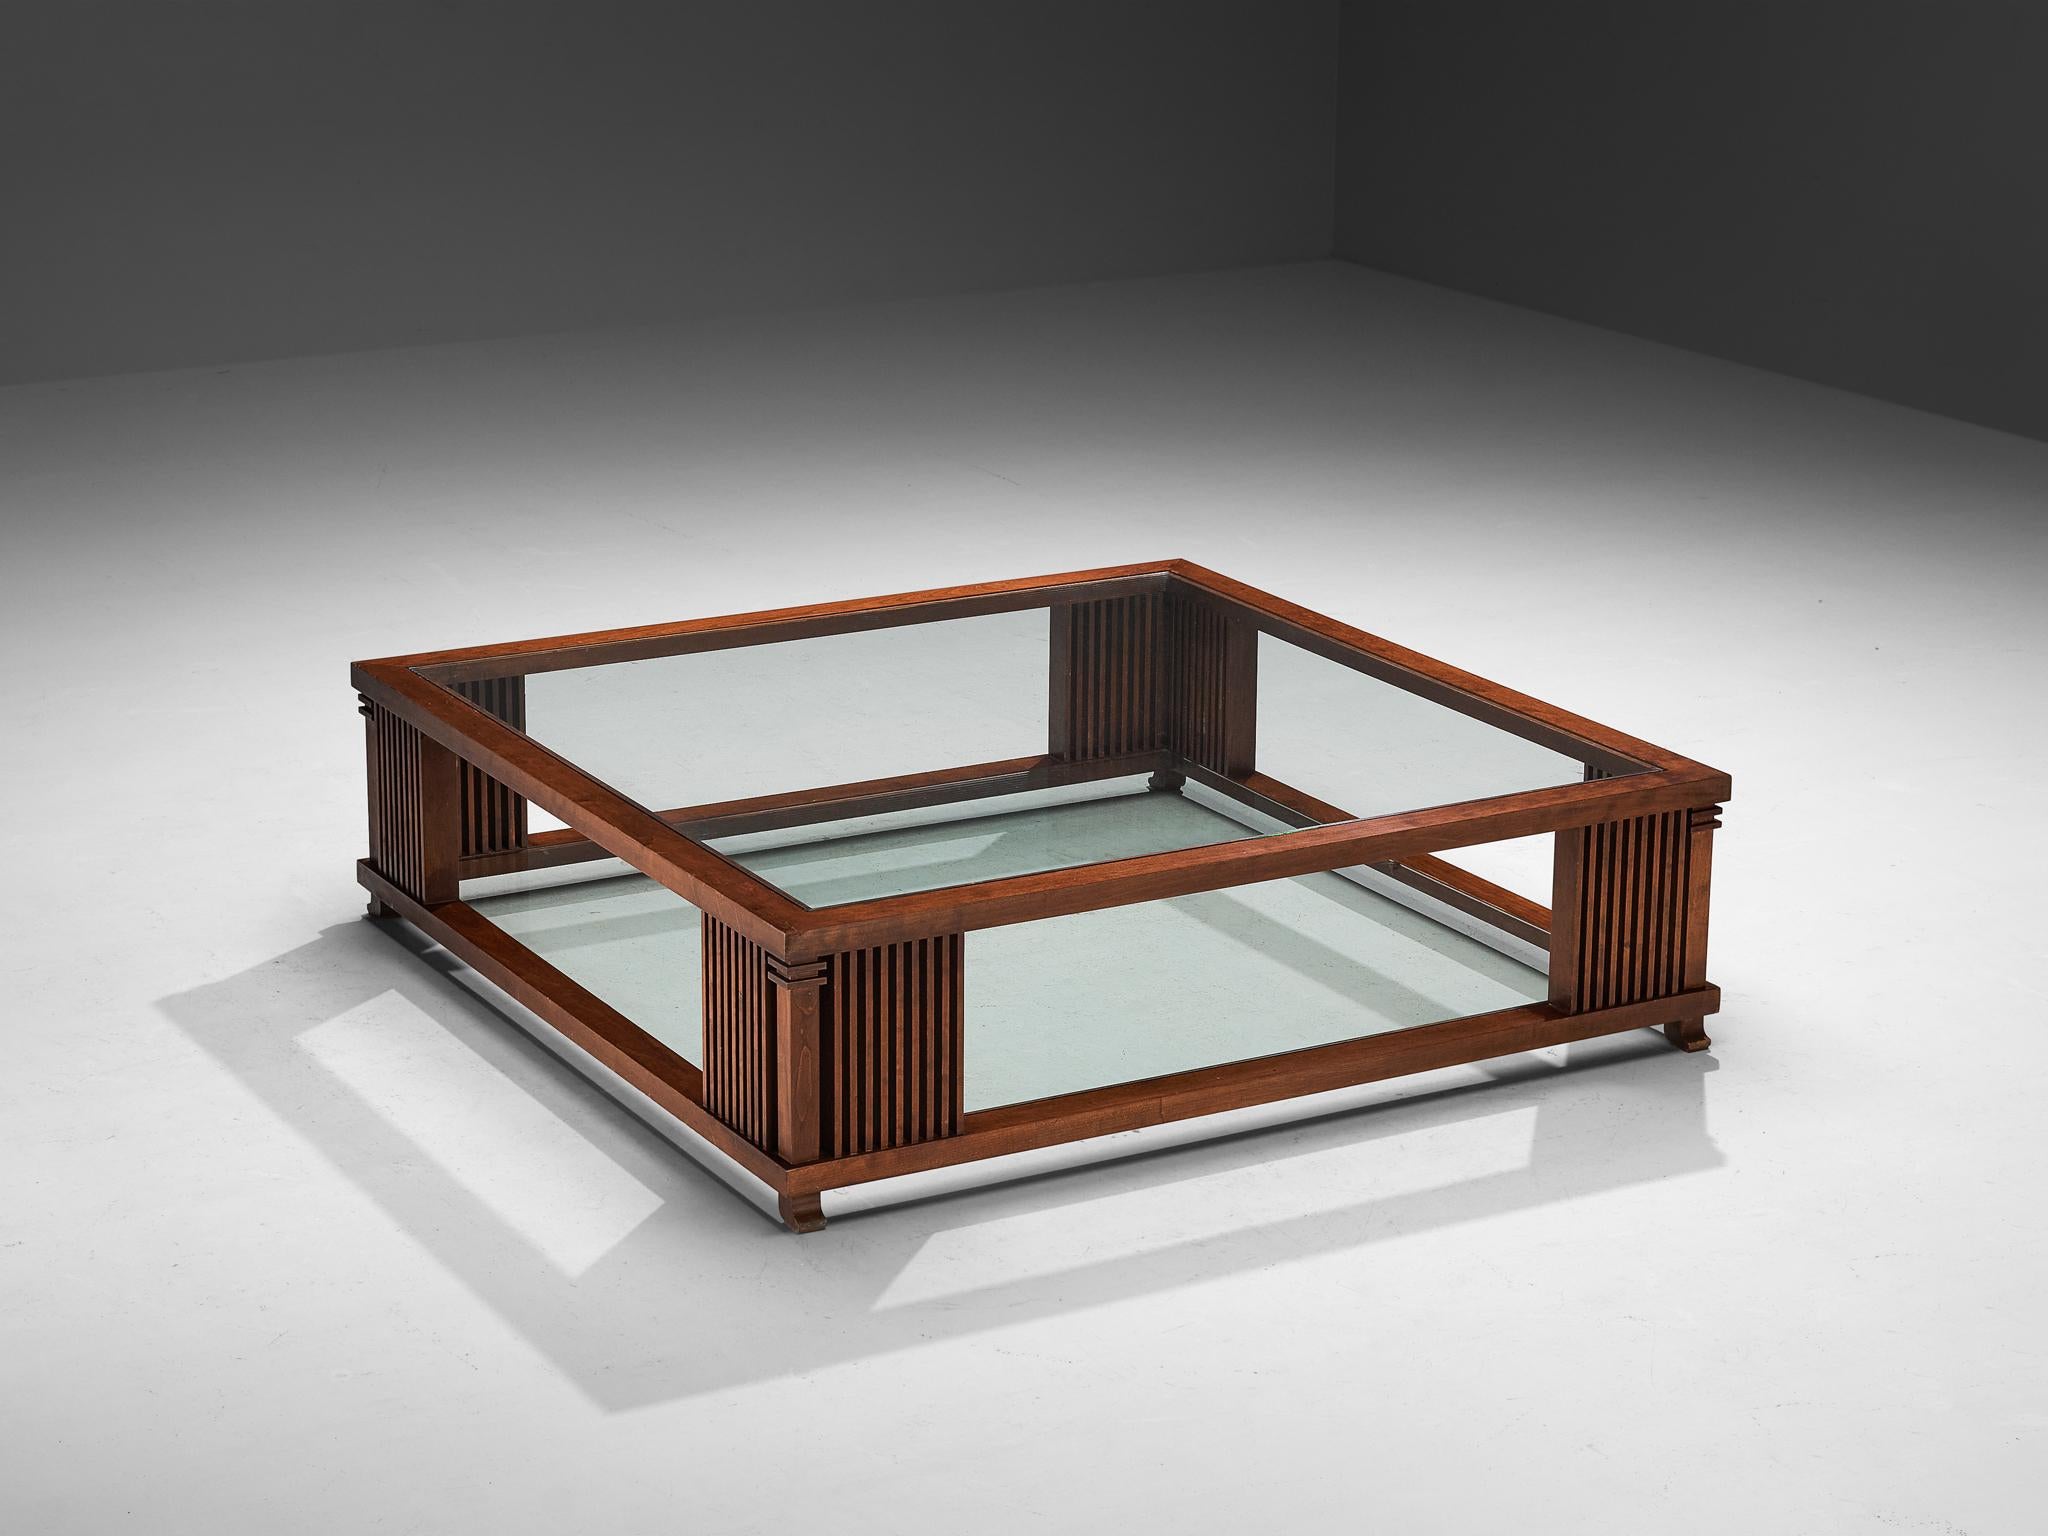 Frank Lloyd Wright for Cassina, coffee table, model 'Robie', maple, glass, Italy, 1986

Originally designed by Frank Lloyd Wright for the Robie House in 1908, Cassina reproduced this table in 1986. A well-constructed table with intricate details